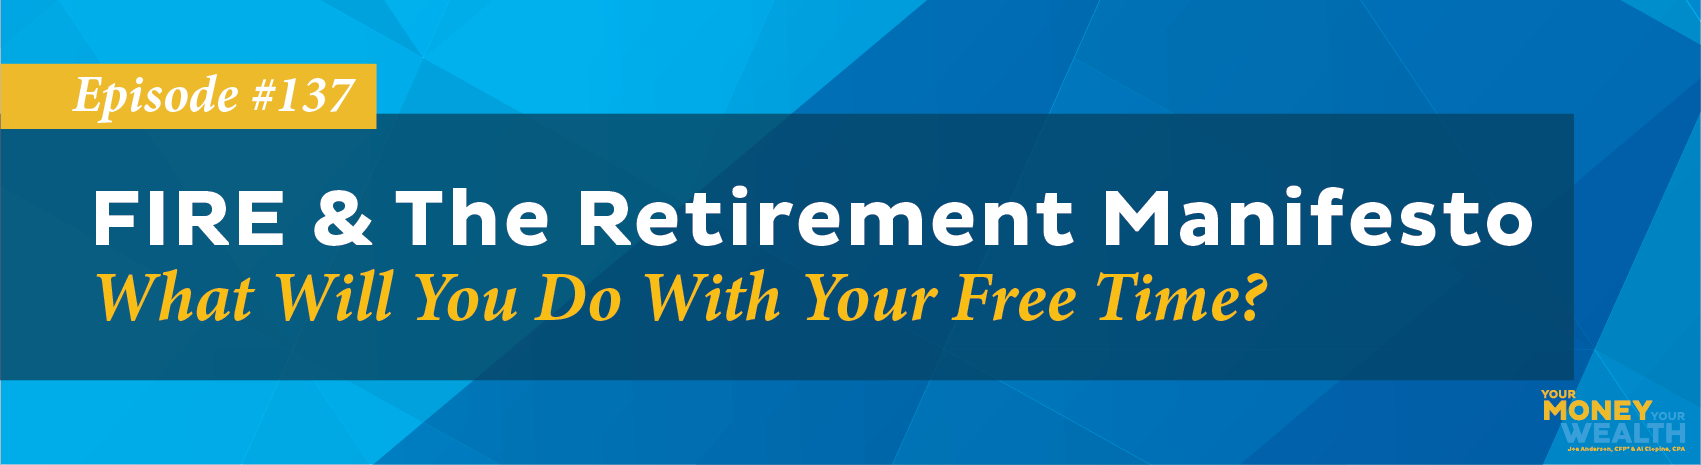 FIRE & The Retirement Manifesto: What Will You Do With Your Free Time?